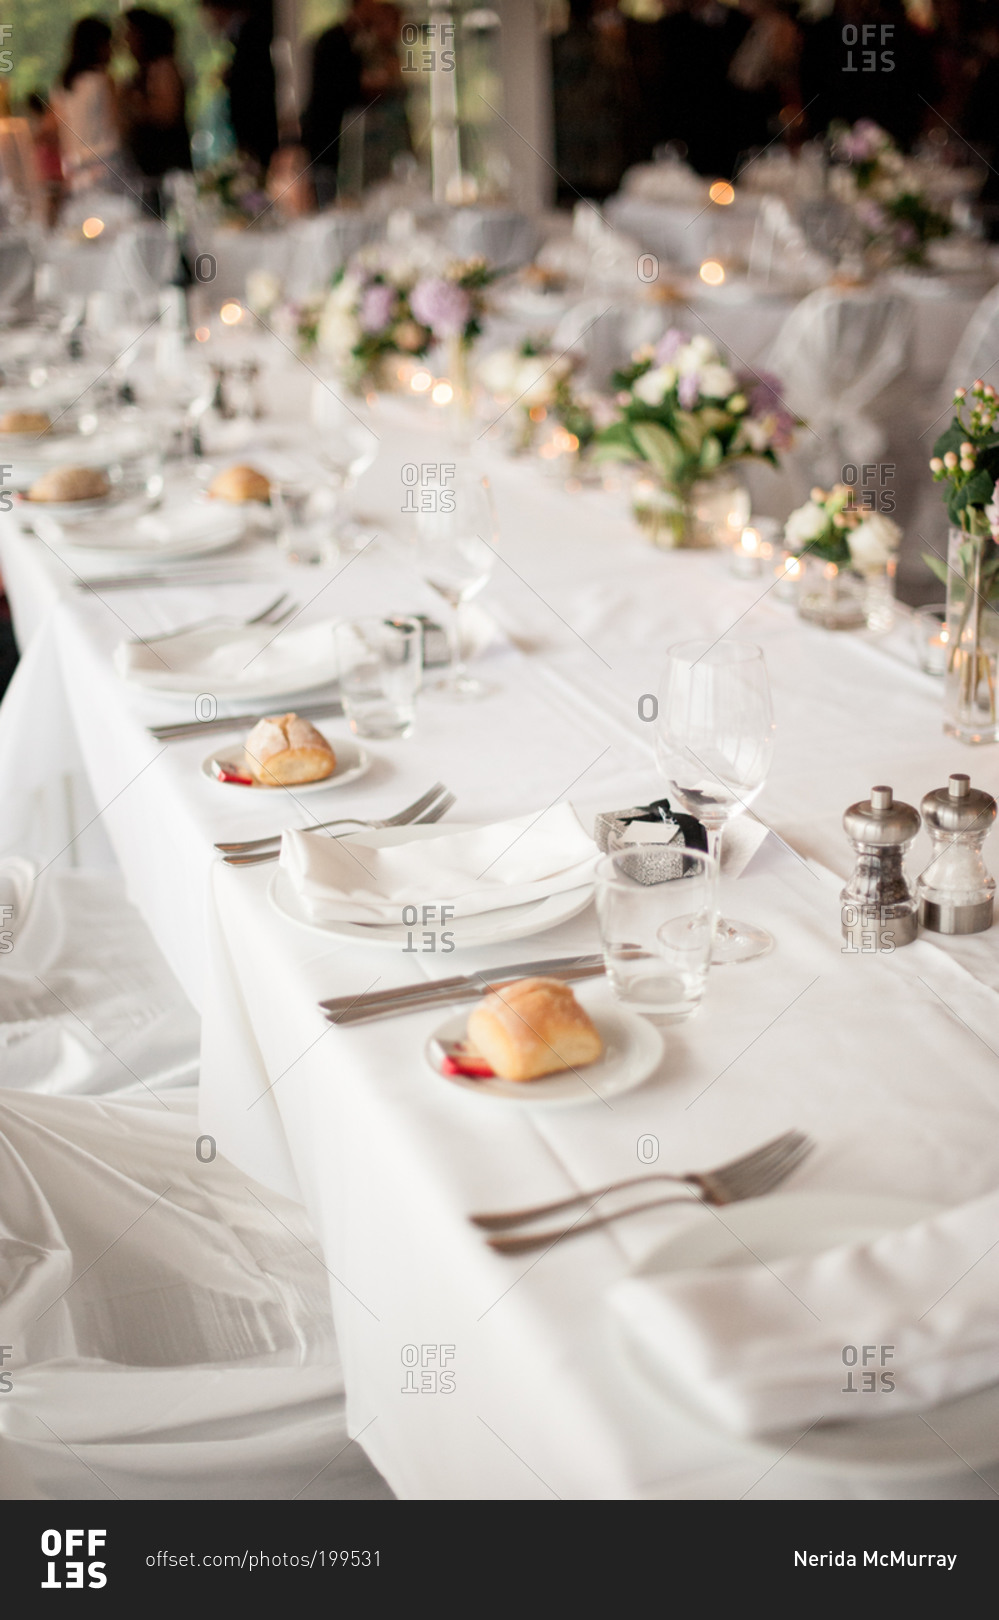 Long banquet table set for a wedding reception